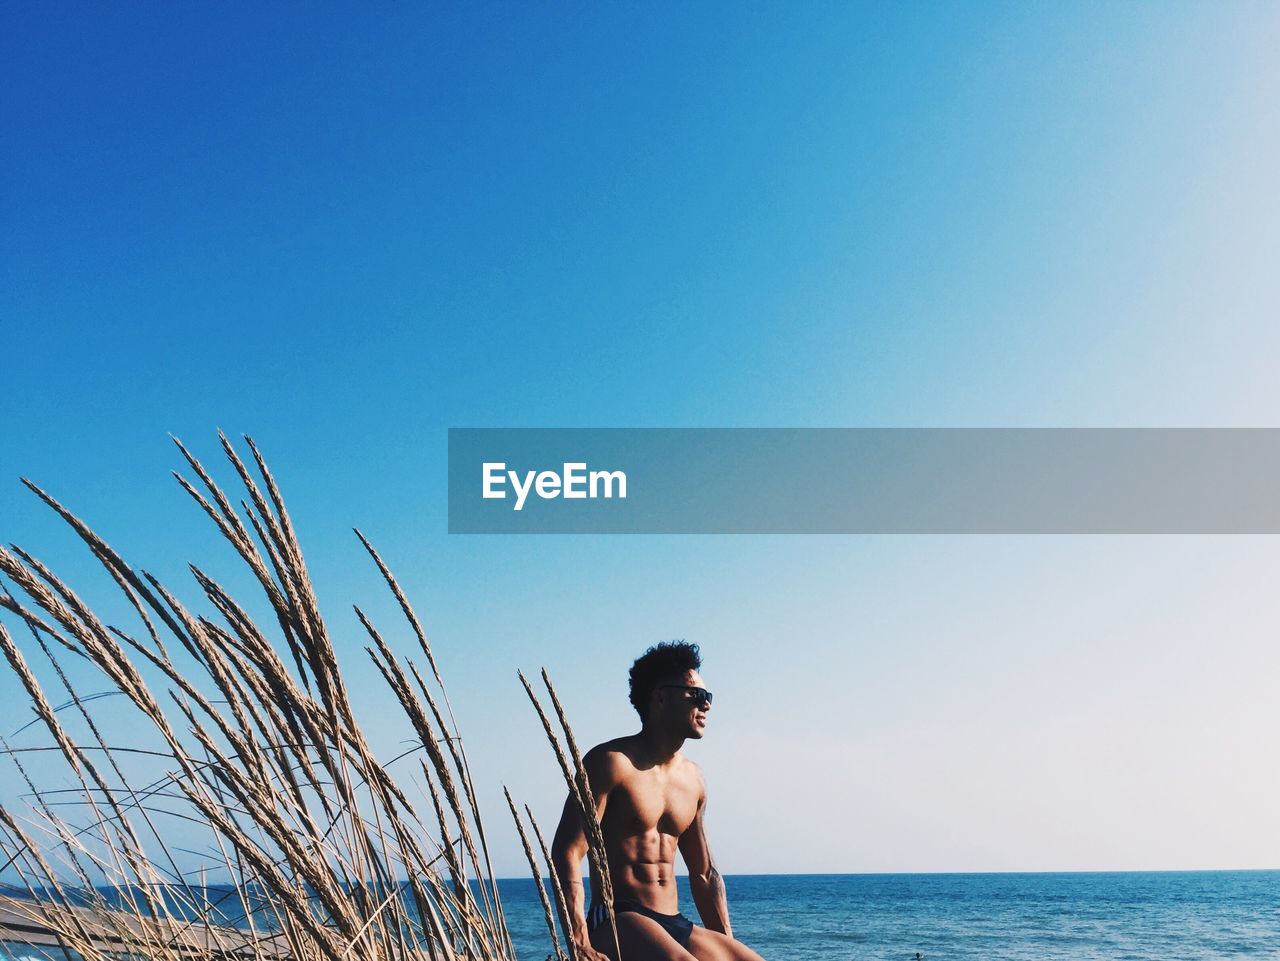 Shirtless young man sitting at beach against clear sky during sunny day